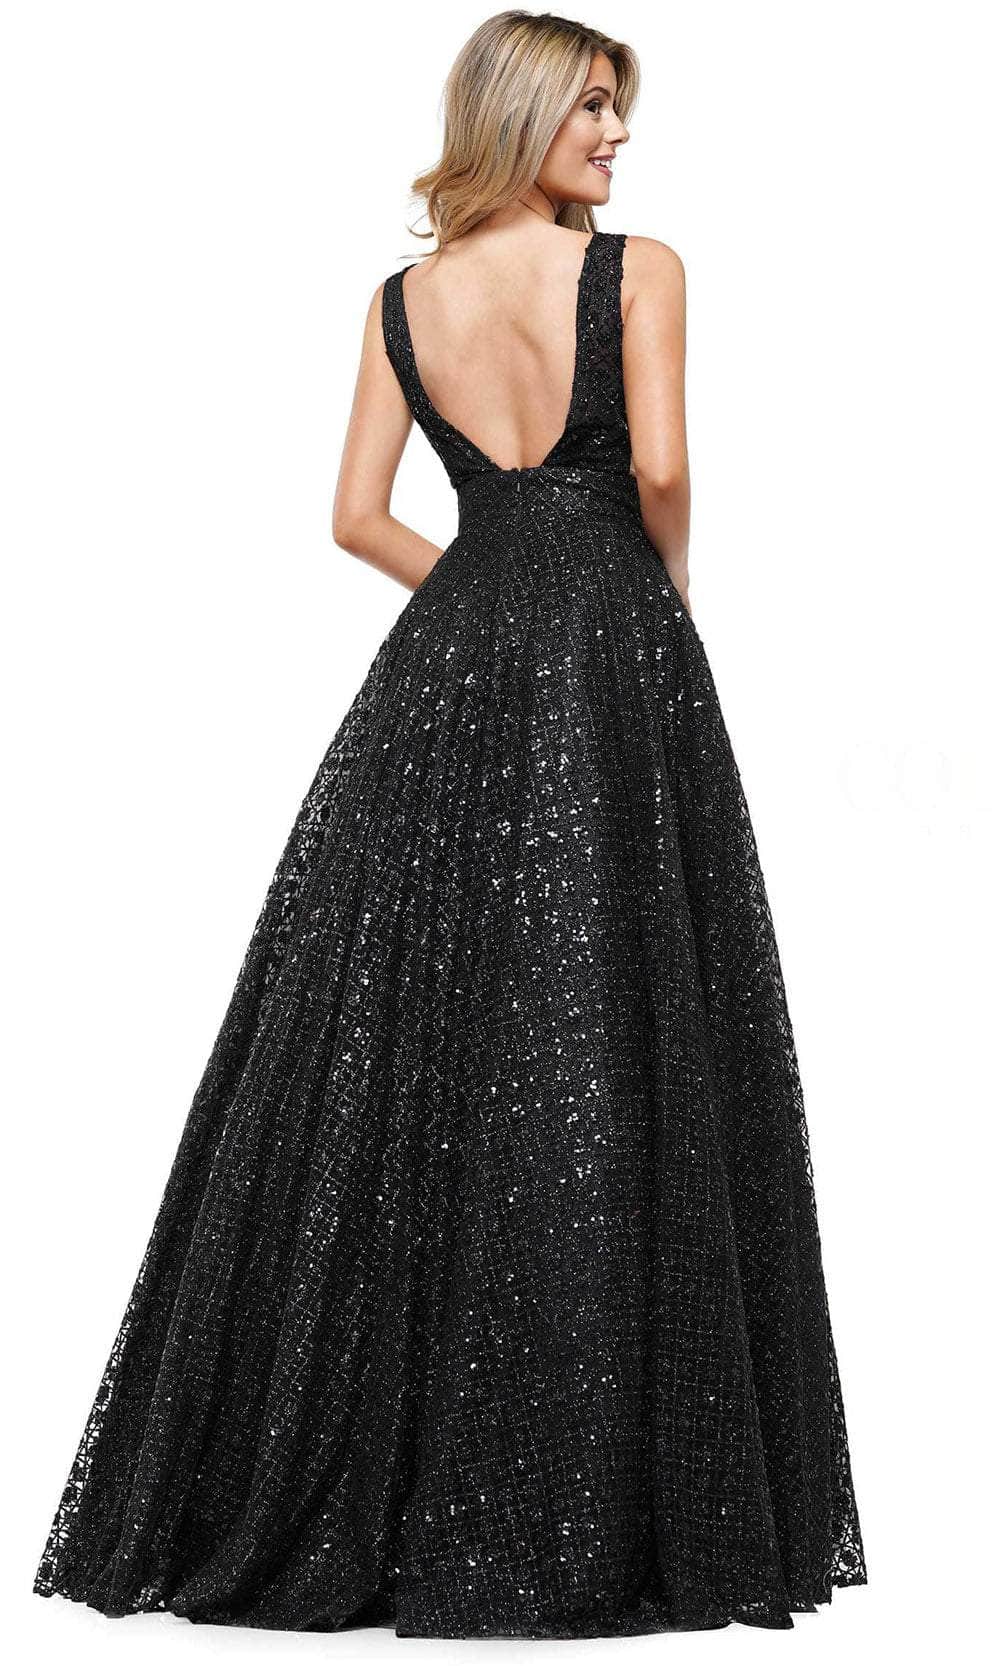 Colors Dress 2170 - Glitter Sequin A-Line Prom Dress Special Occasion Dress